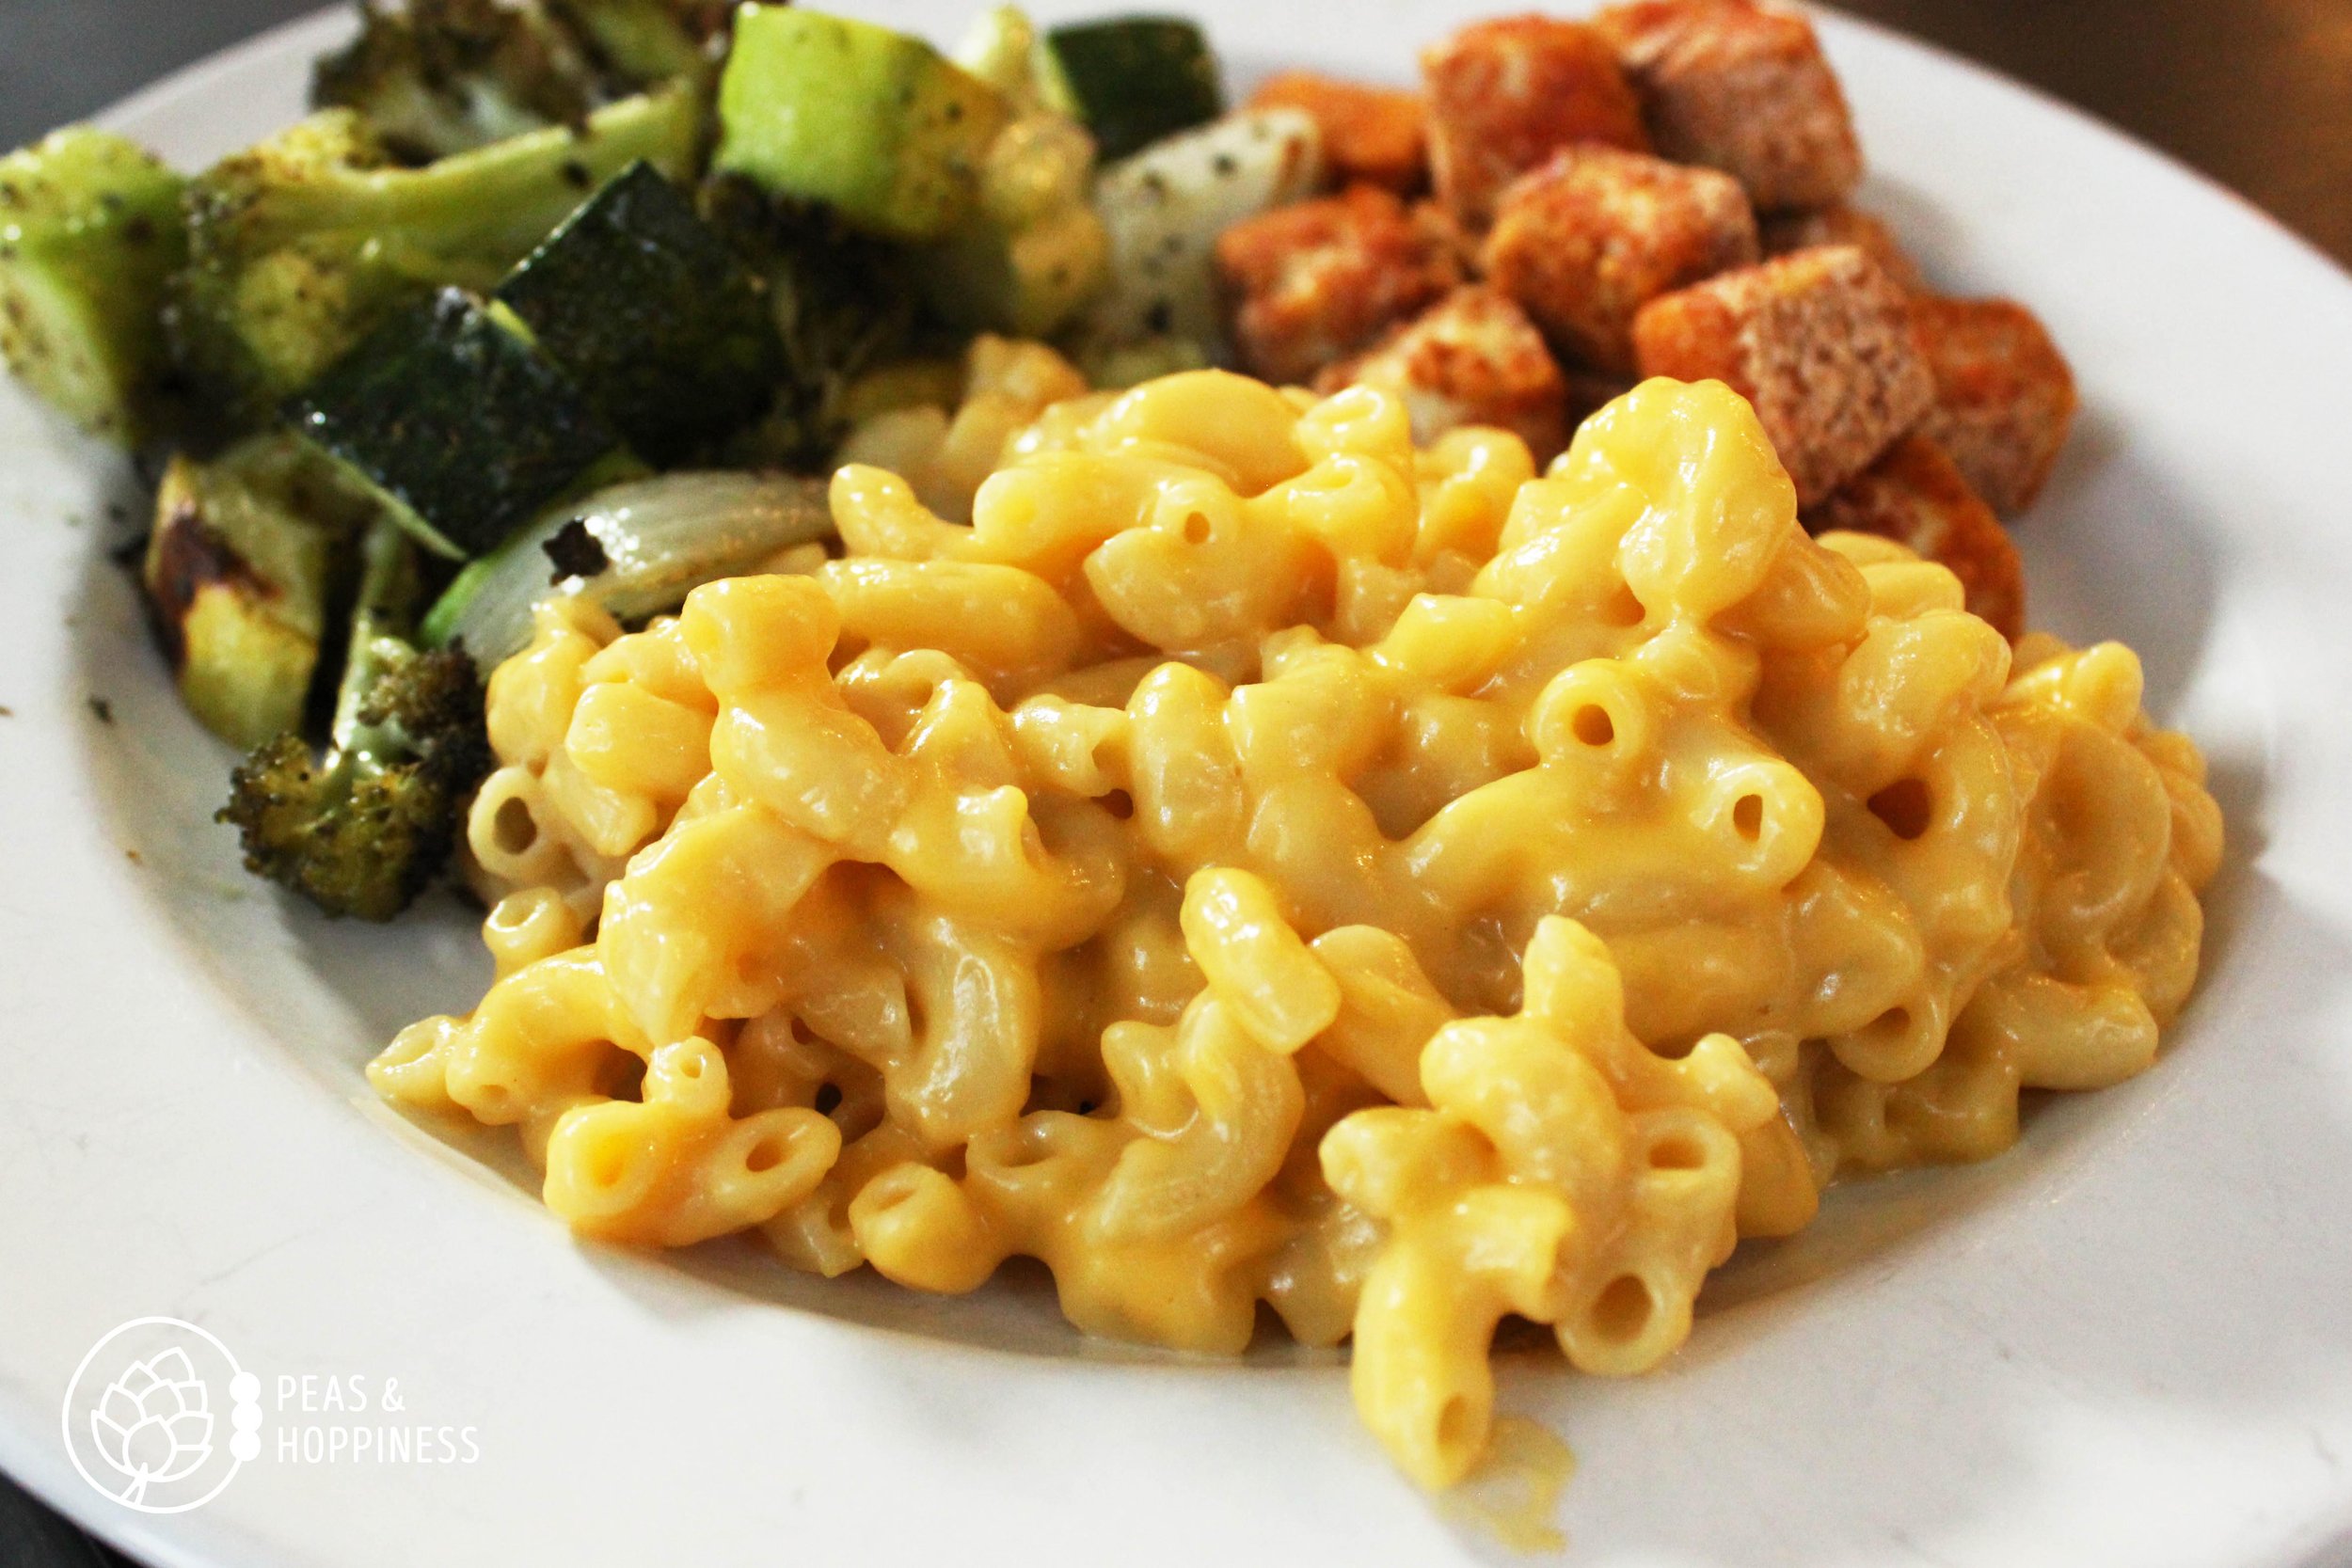 Macaroni and Cheese featured on our family-friendly healthy meal planning service